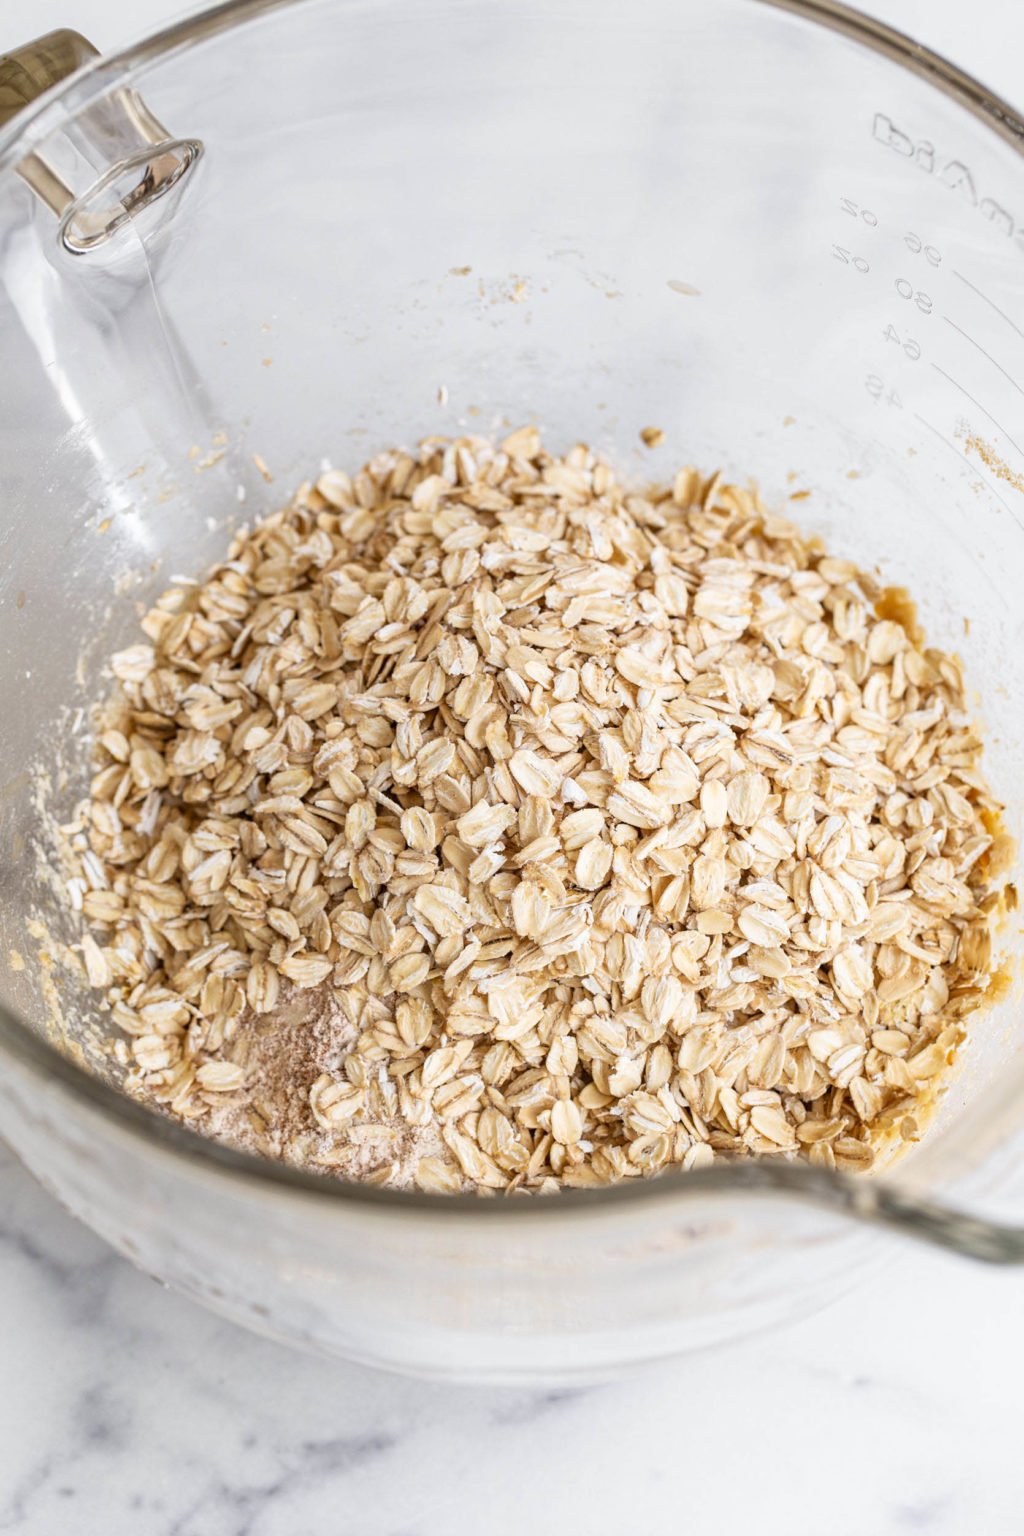 The bowl of a stand mixer is filled with rolled oats.